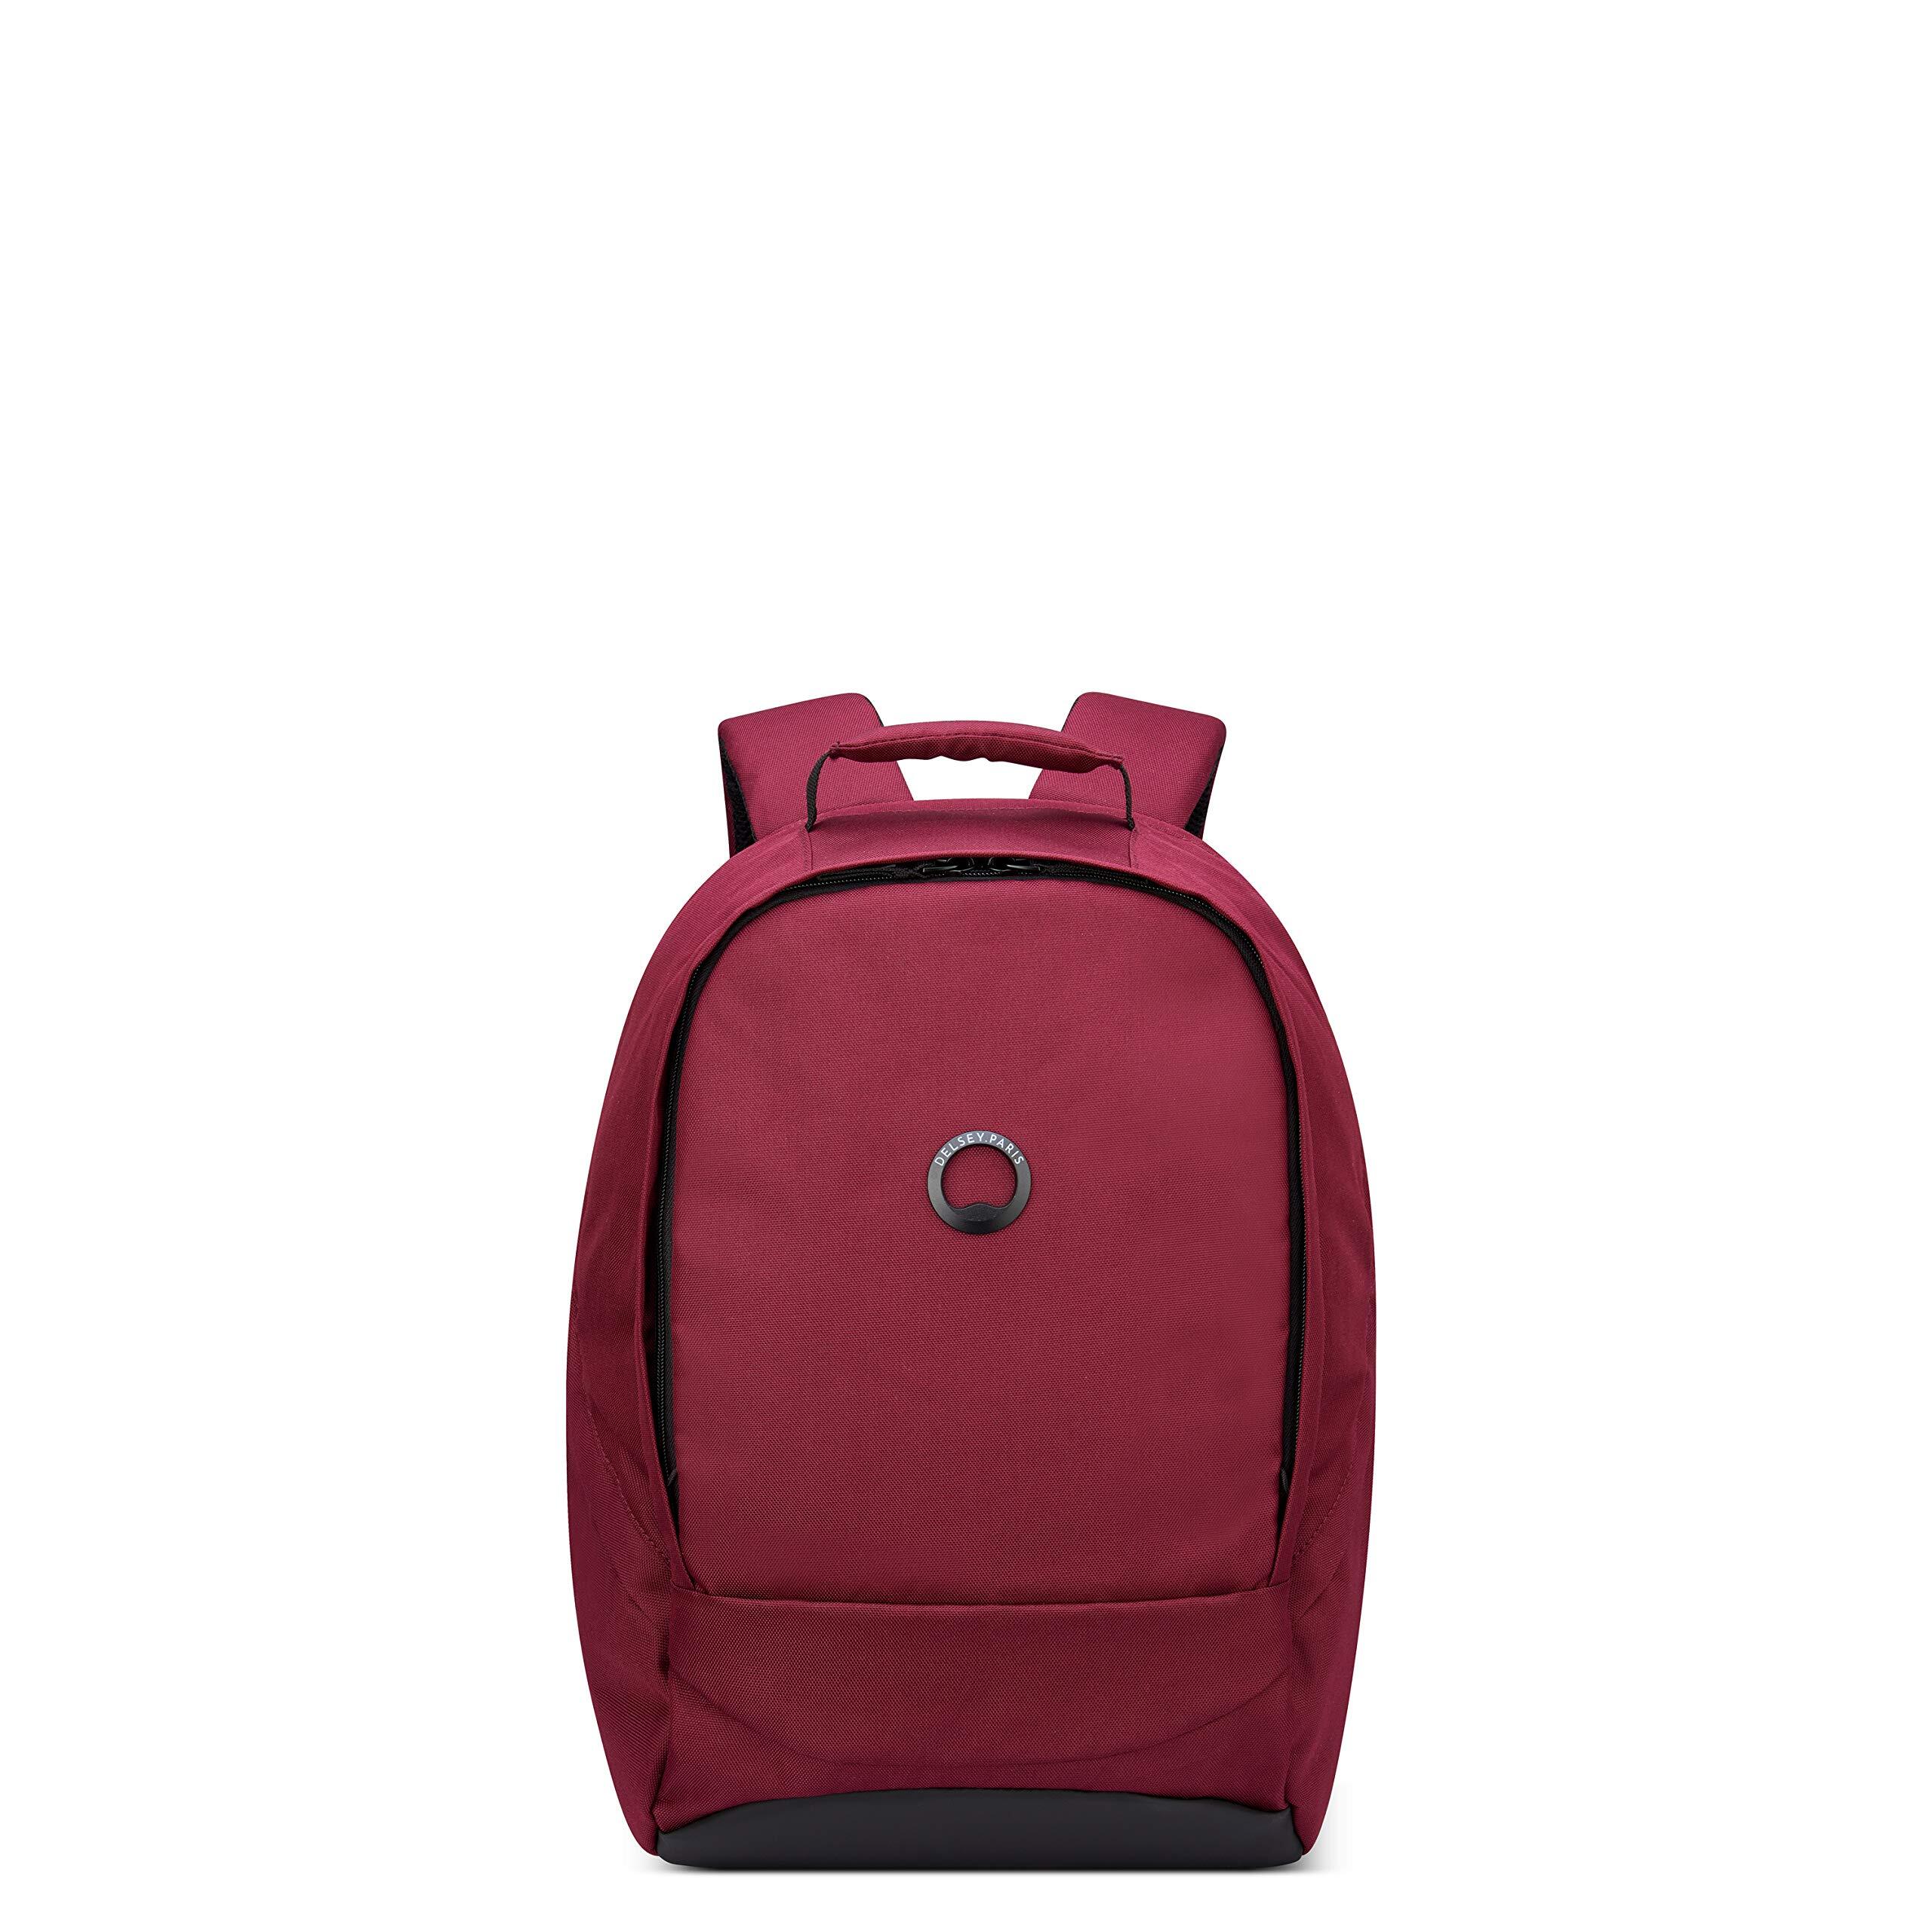 DELSEY Securban Laptop Backpack - Anti Diefstal - 1 Compartment - 13,3 inch - Bordeaux